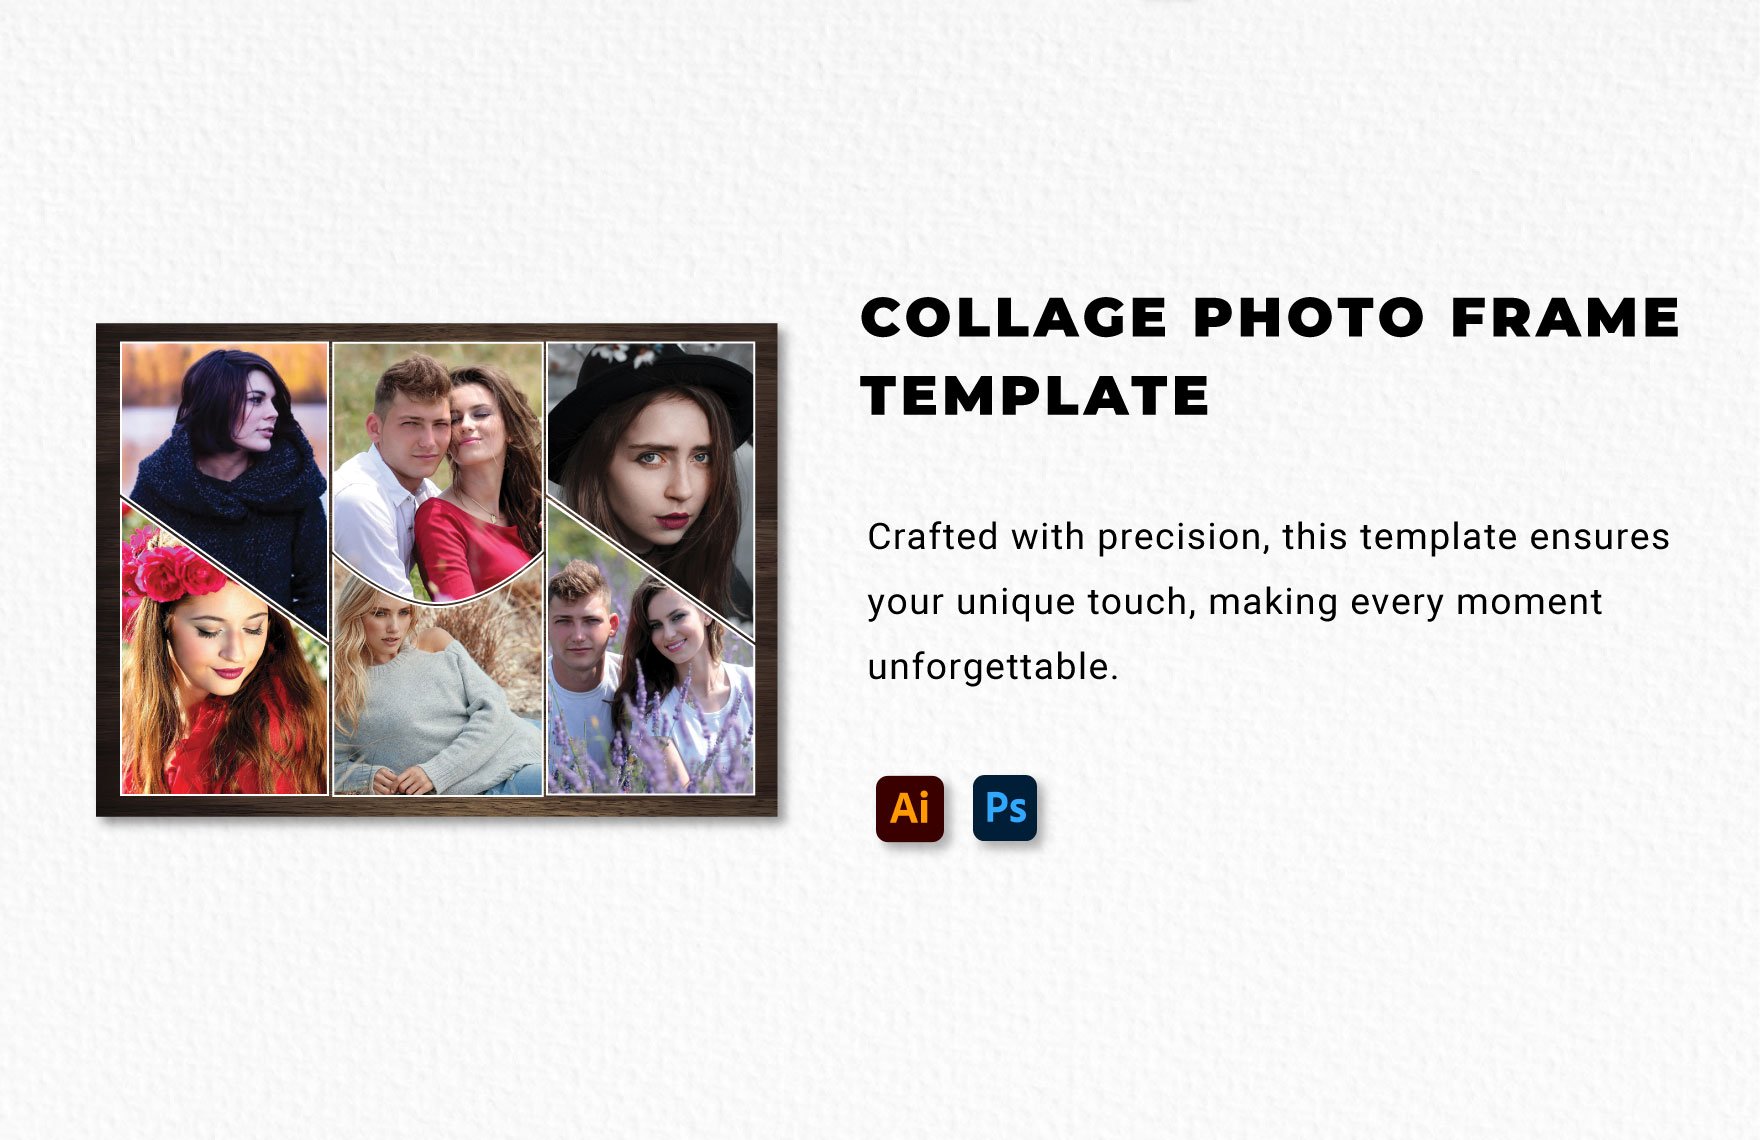 Collage Photo Frame Template